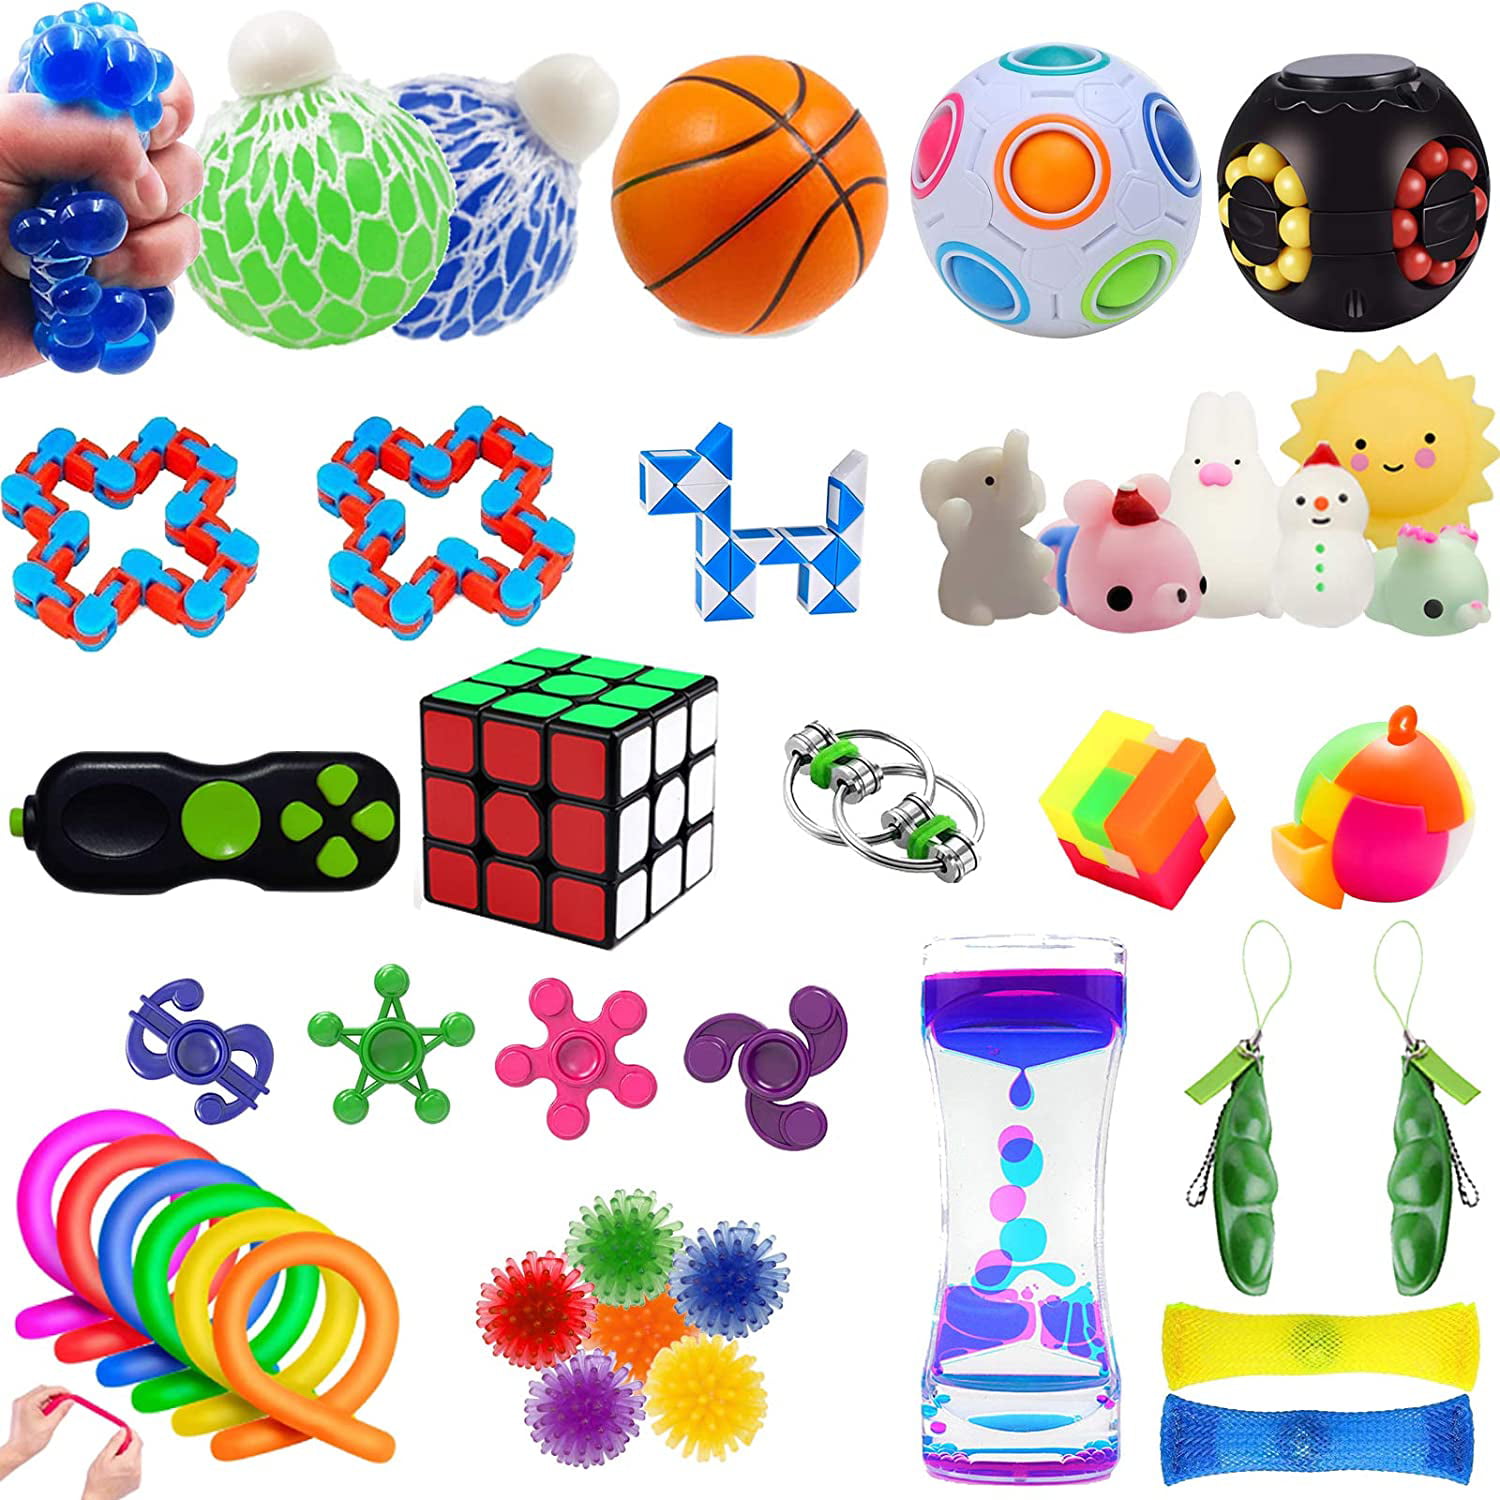 Details about   4Pcs Fidget Toys Sensory Anxiety ADHD Stress Relief Kid Squeeze Toys US 